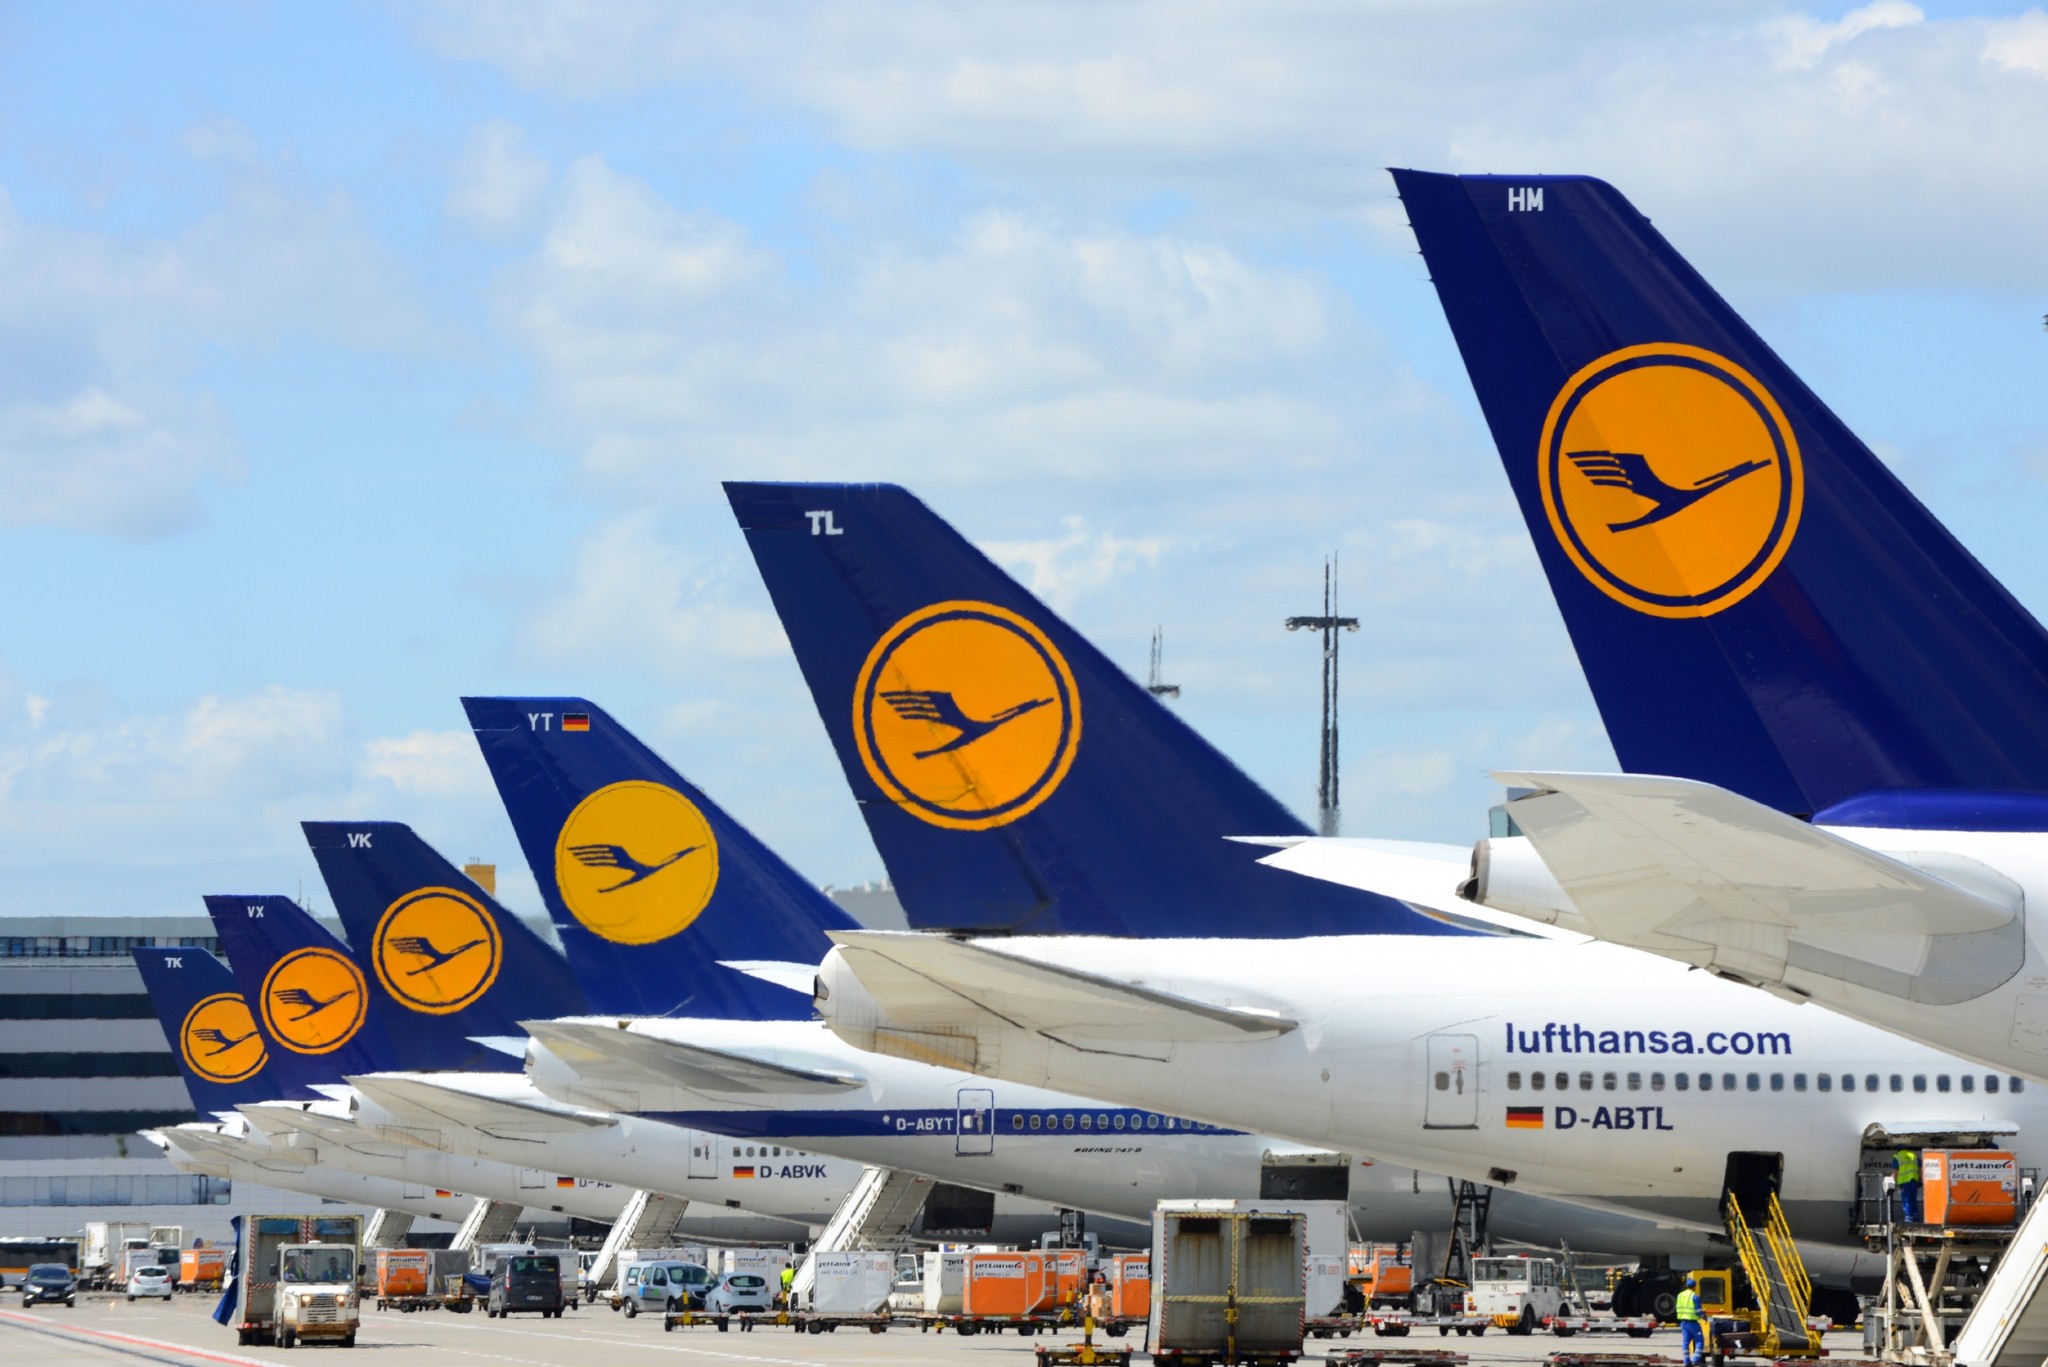 Lufthansa prepares to welcome its first A350-900